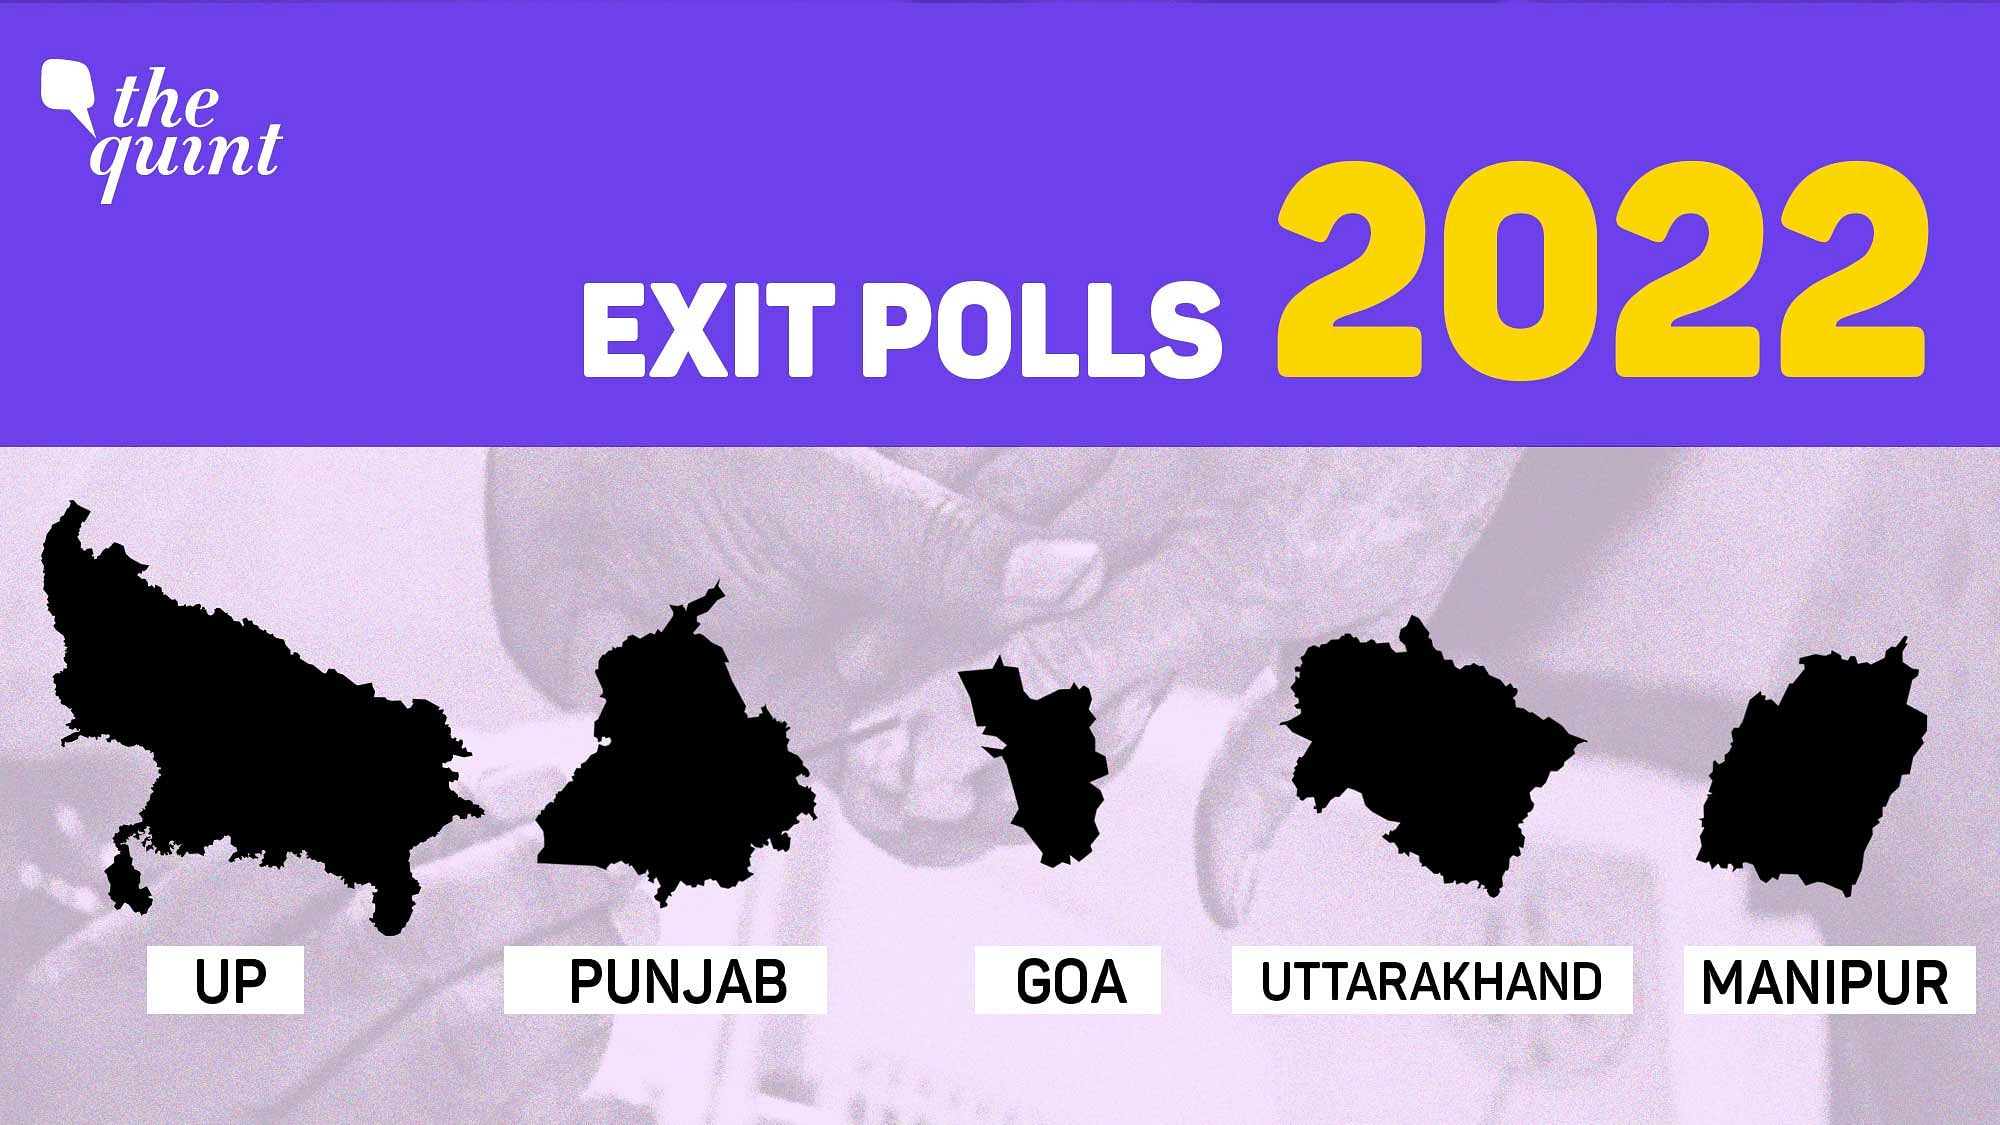 <div class="paragraphs"><p>The counting of votes will be held on 10 March. But here's what the exit polls for Uttar Pradesh, Punjab, Goa, Manipur, and Uttarakhand are predicting.</p></div>